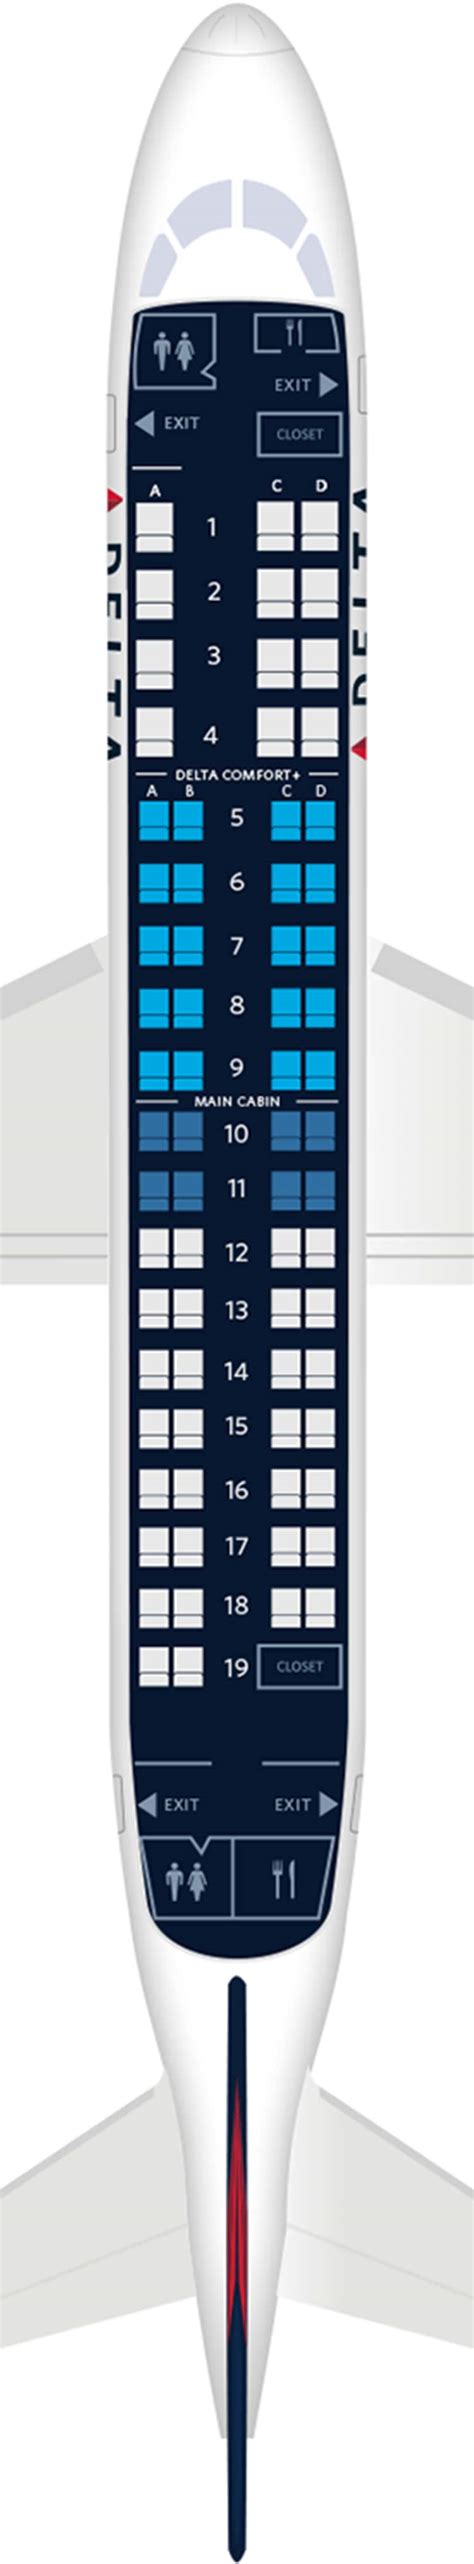 Embraer 175 seat map. Embraer ERJ-175 Boeing 737-900ER Boeing 737-900ER. 739. 73J. 73R. In-page Links. Seat Specifications, Go to footer note; Seat Map, Go to footer note ... Seat Map; EXITS (8) GALLEYS (2) LAVATORIES (3) FIRST CLASS. DELTA COMFORT+. PREFERRED. MAIN CABIN. Aircraft Specifications. CRUISING SPEED 525 mph (844 km/h) RANGE 